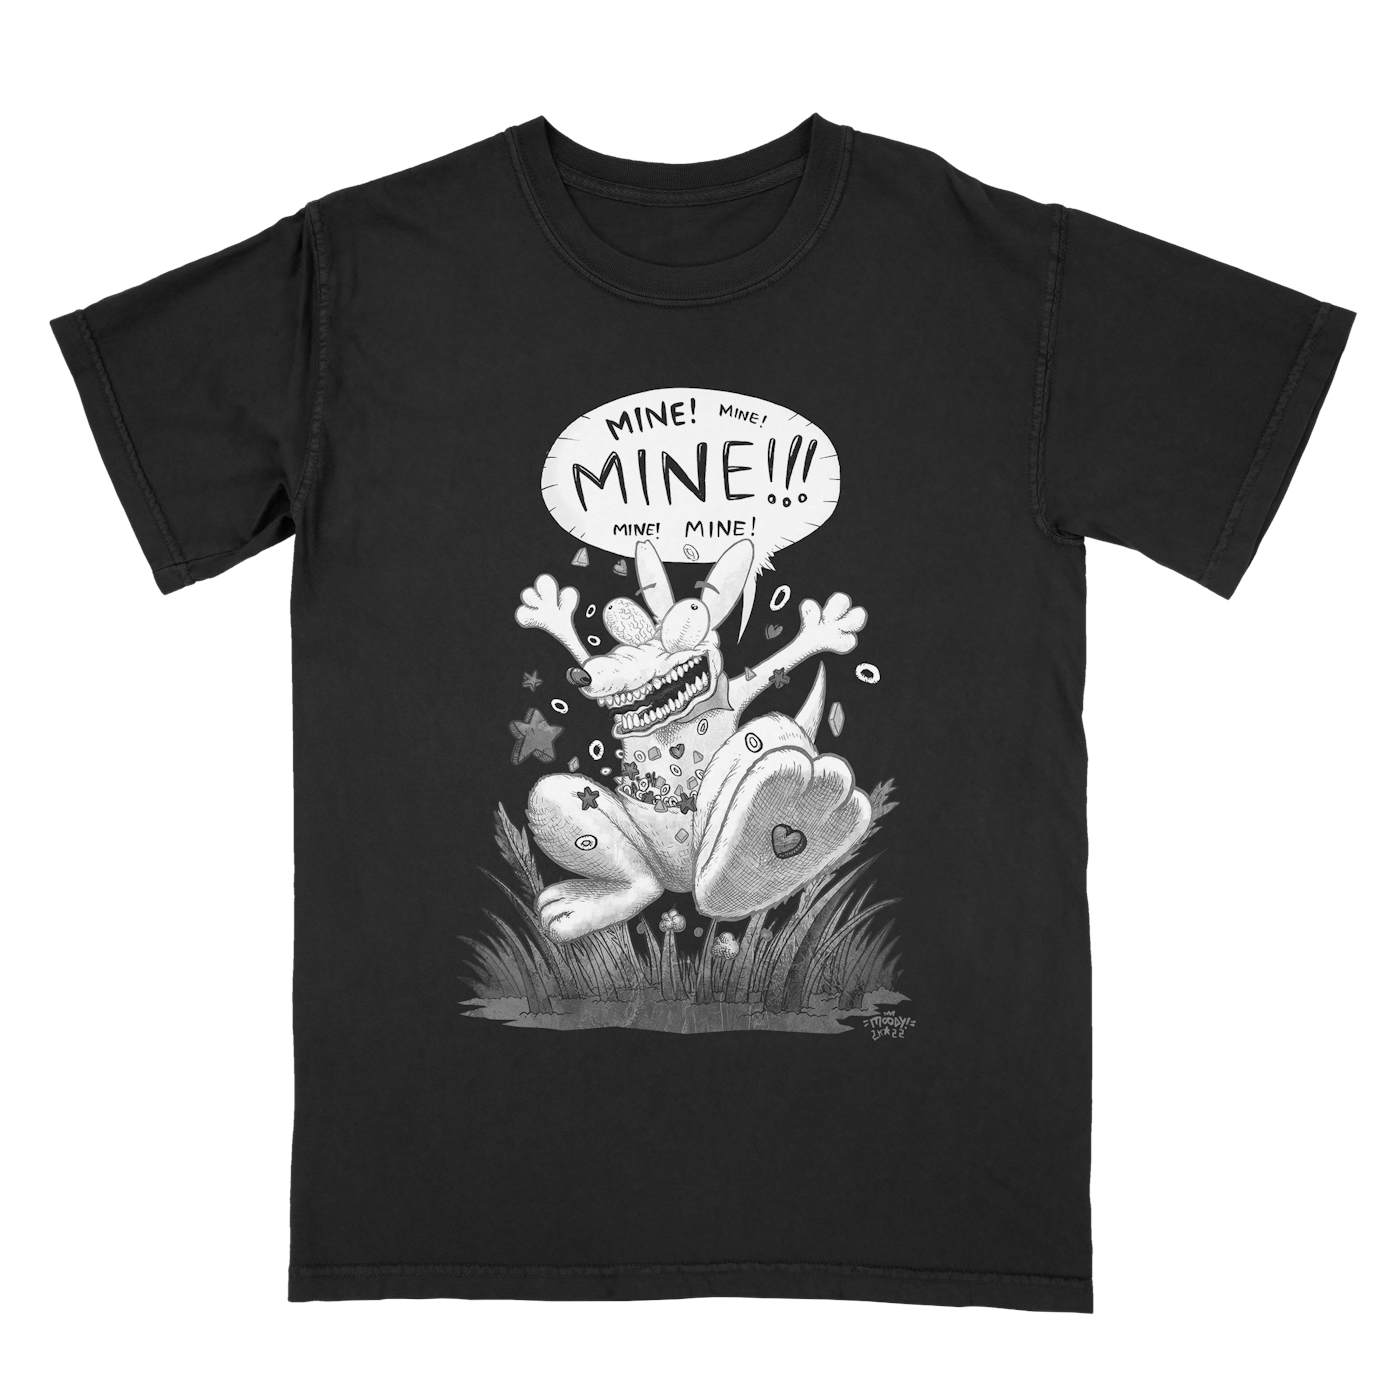  Vince Staples - "Mine" T-Shirt and Signed Book